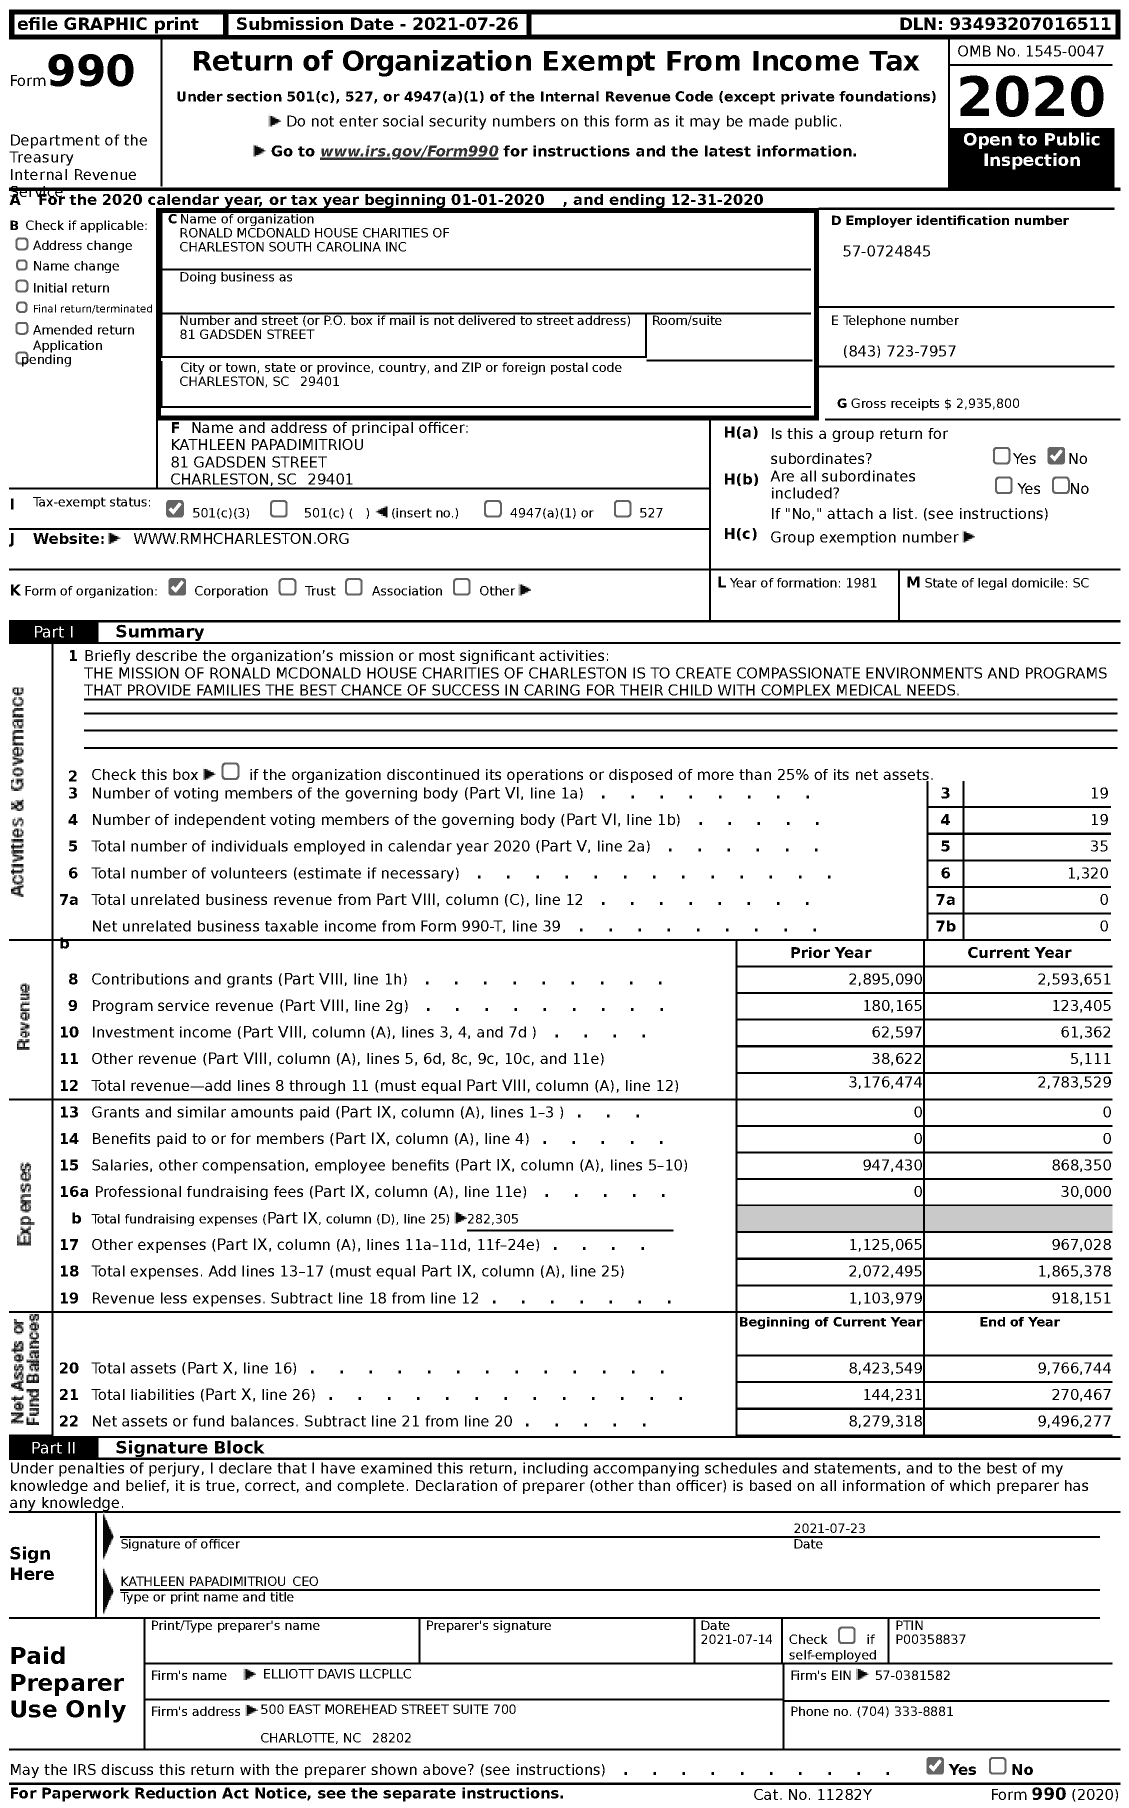 Image of first page of 2020 Form 990 for Ronald Mcdonald House Charities of Charleston South Carolina